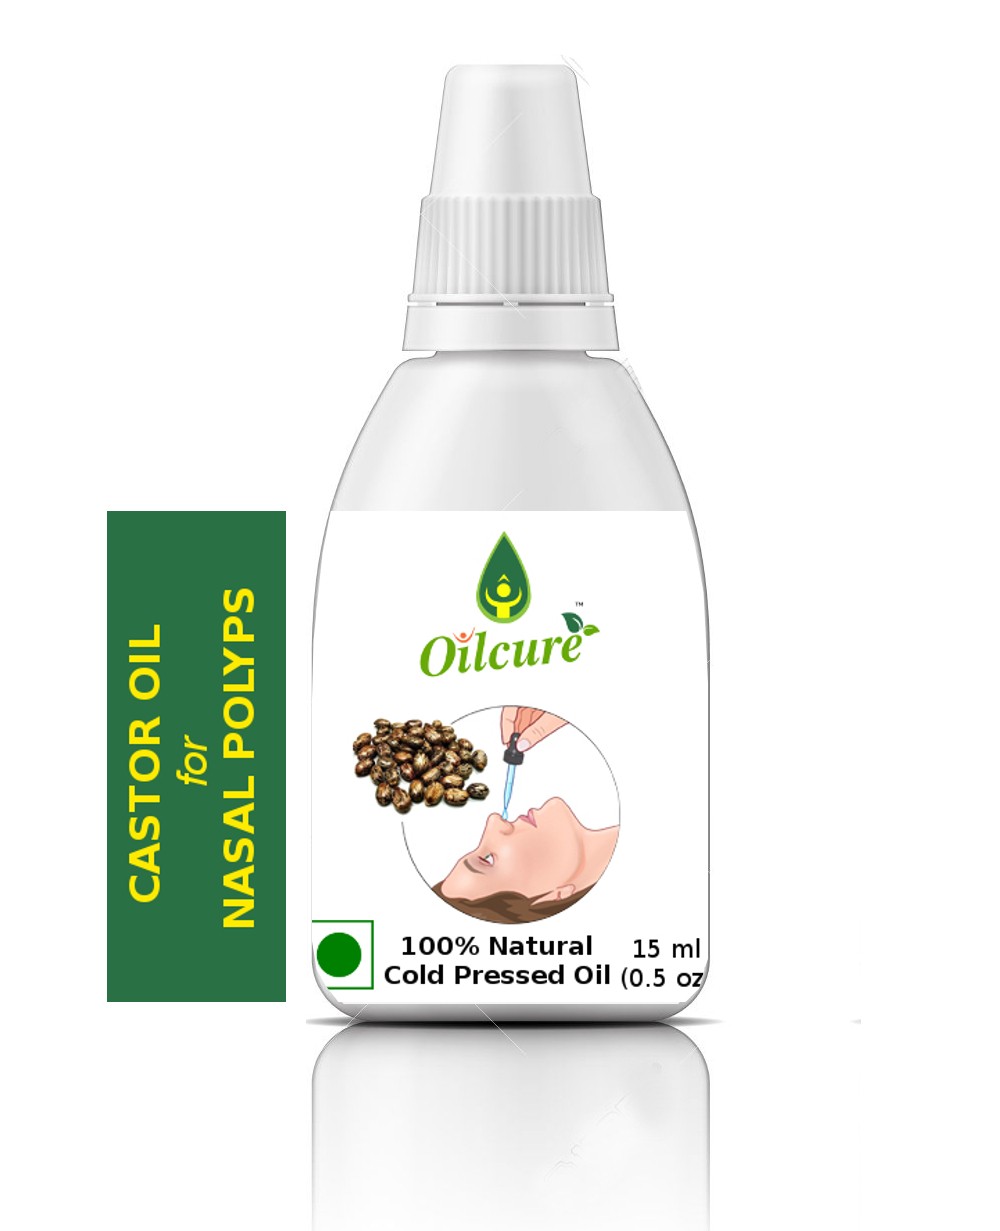 To use castor oil for nasal polyps, some people suggest applying the oil topically to the affected area or inhaling steam infused with castor oil